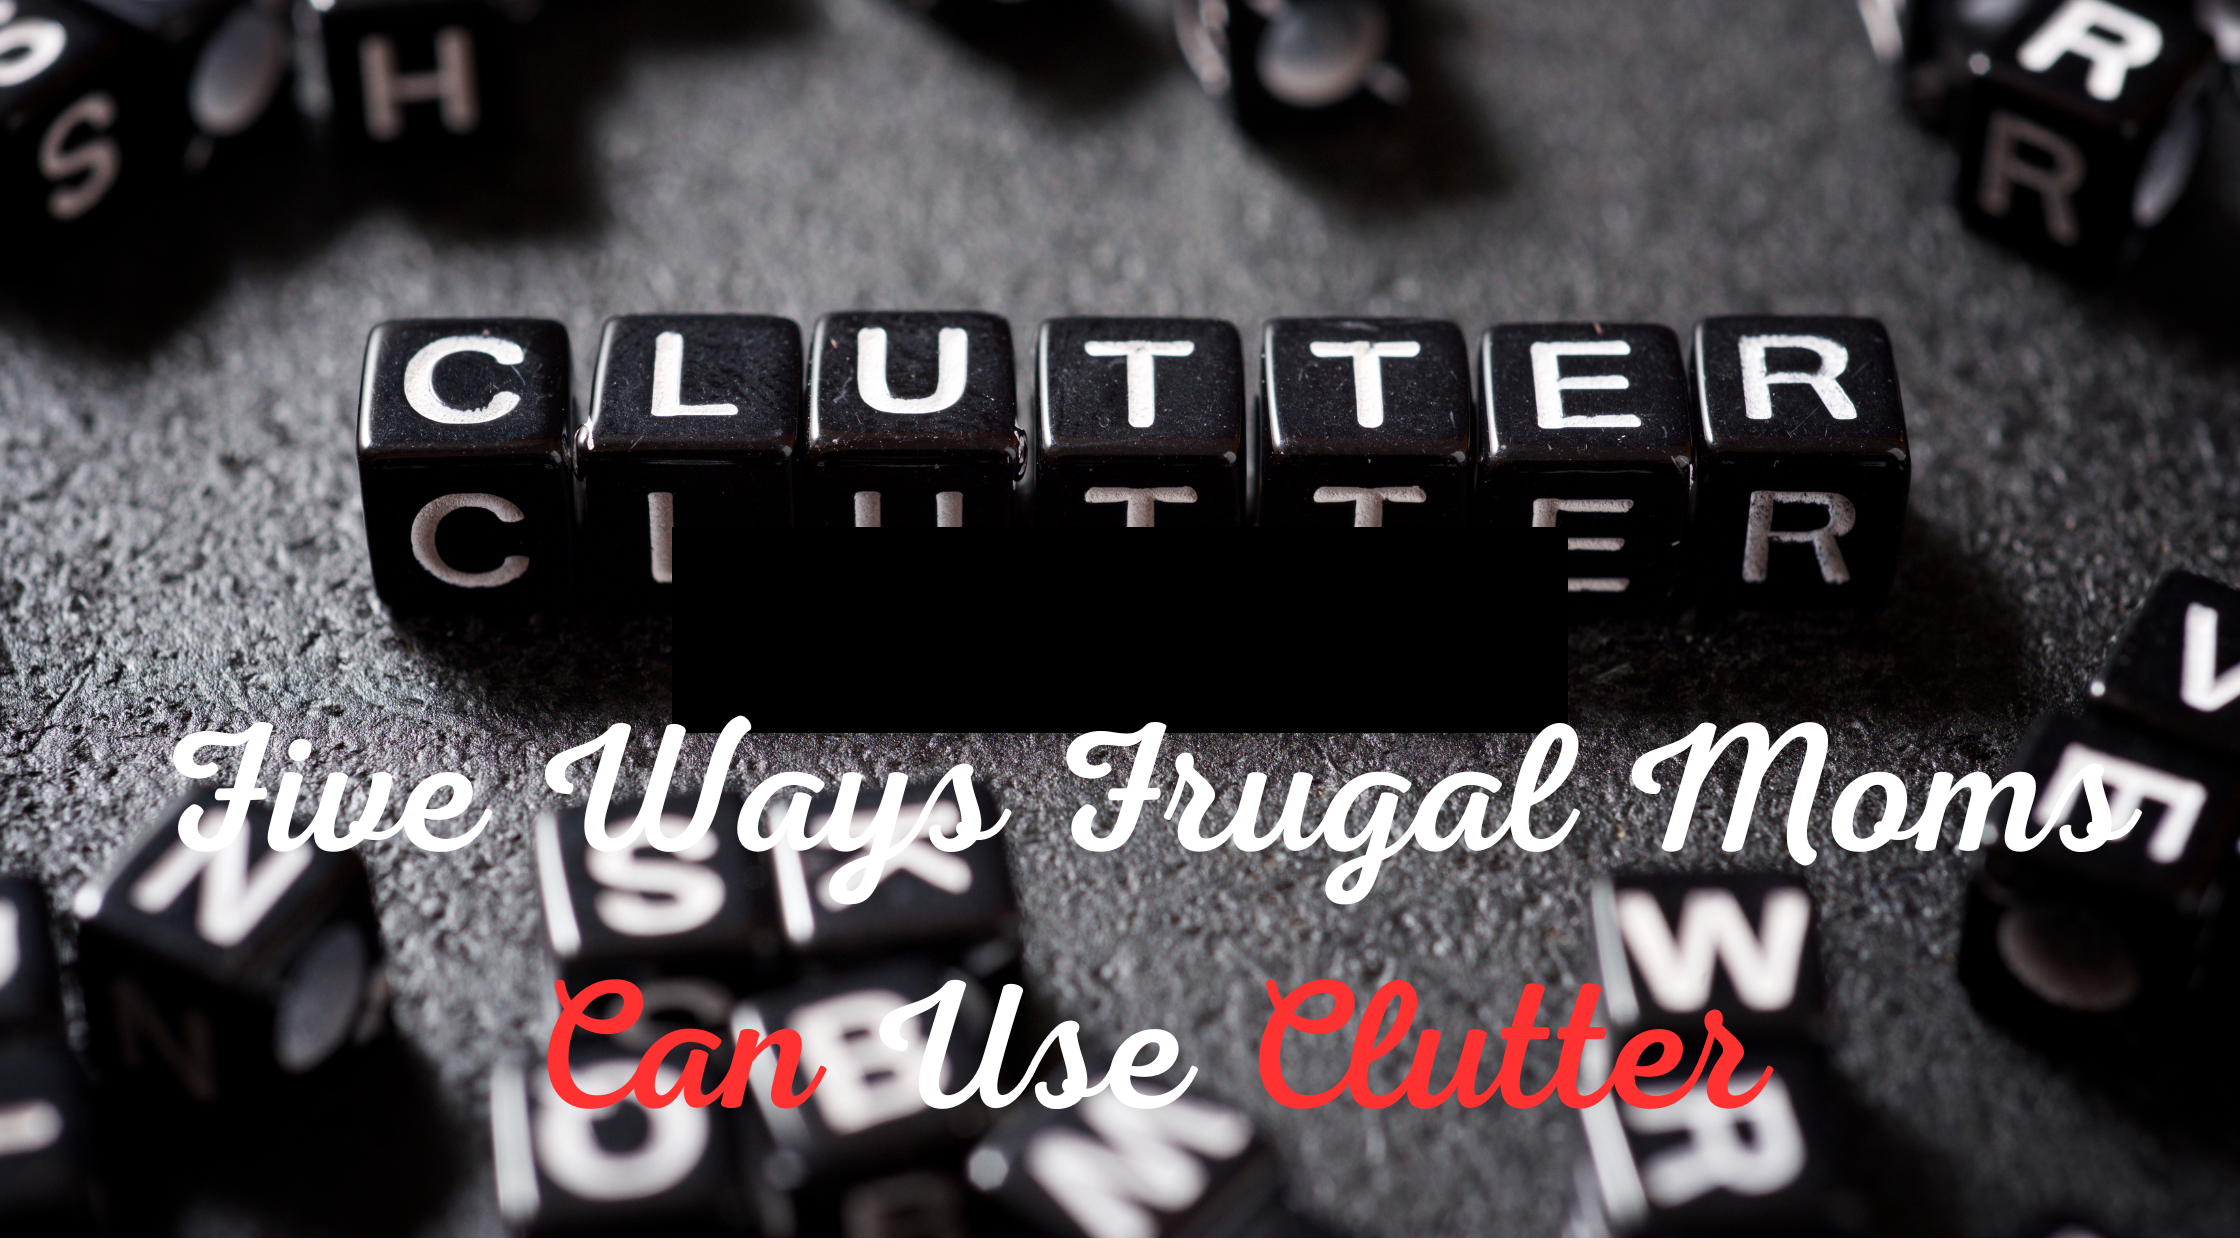 Five Ways Frugal Moms Can Use Clutter